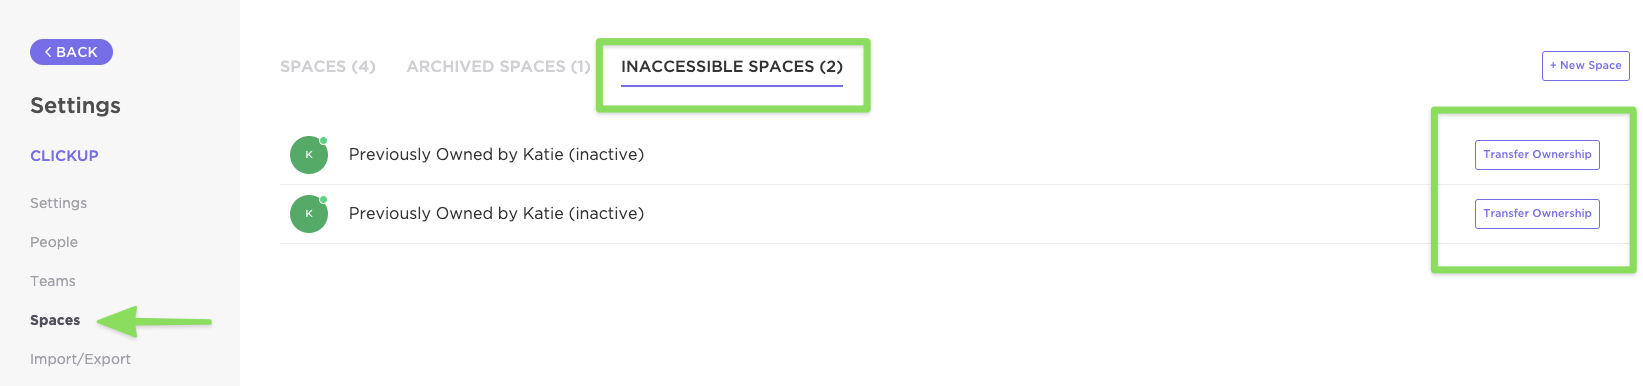 Screenshot highlighting the 'inaccessible spaces' tab in the Spaces settings page.